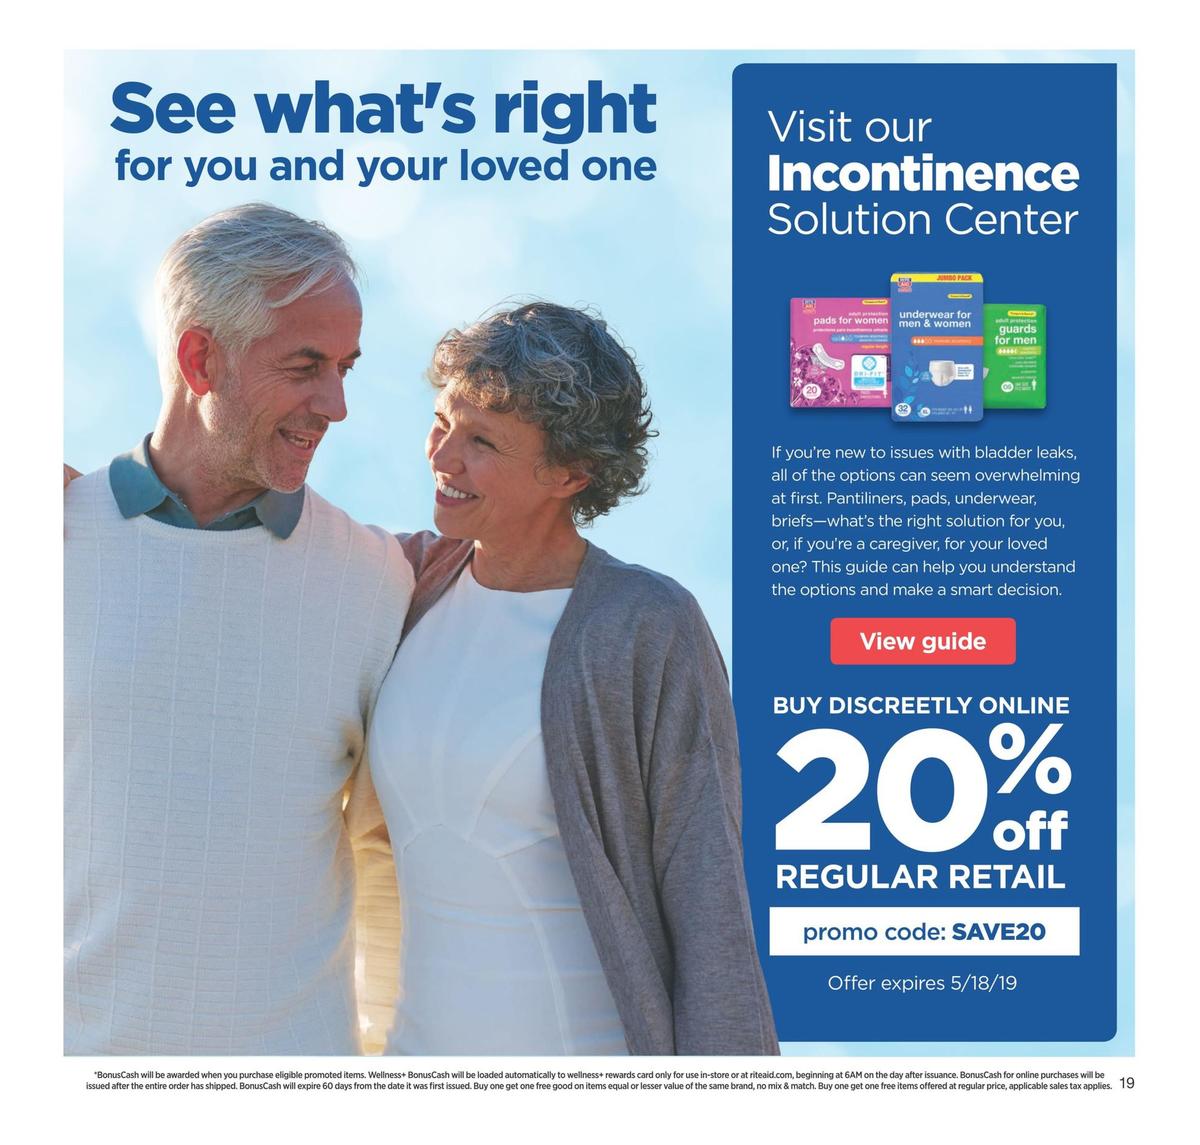 Rite Aid Weekly Ad from May 12